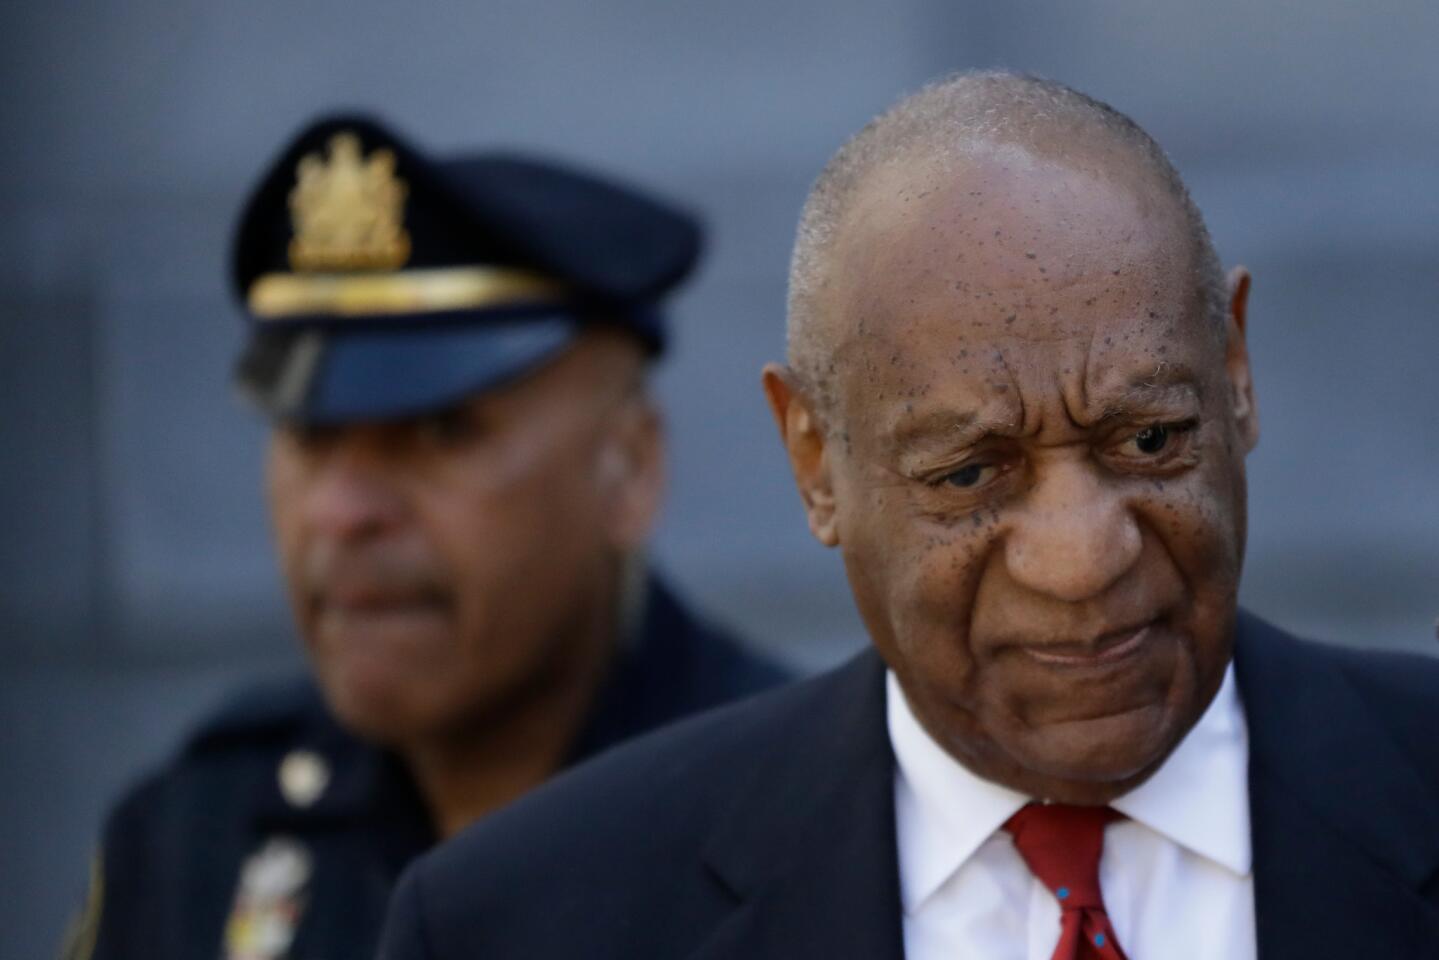 Bill Cosby departs after his sexual assault trial, April 26, 2018, at the Montgomery County Courthouse in Norristown, Pa. Cosby was convicted Thursday of drugging and molesting a woman in the first big celebrity trial of the #MeToo era.